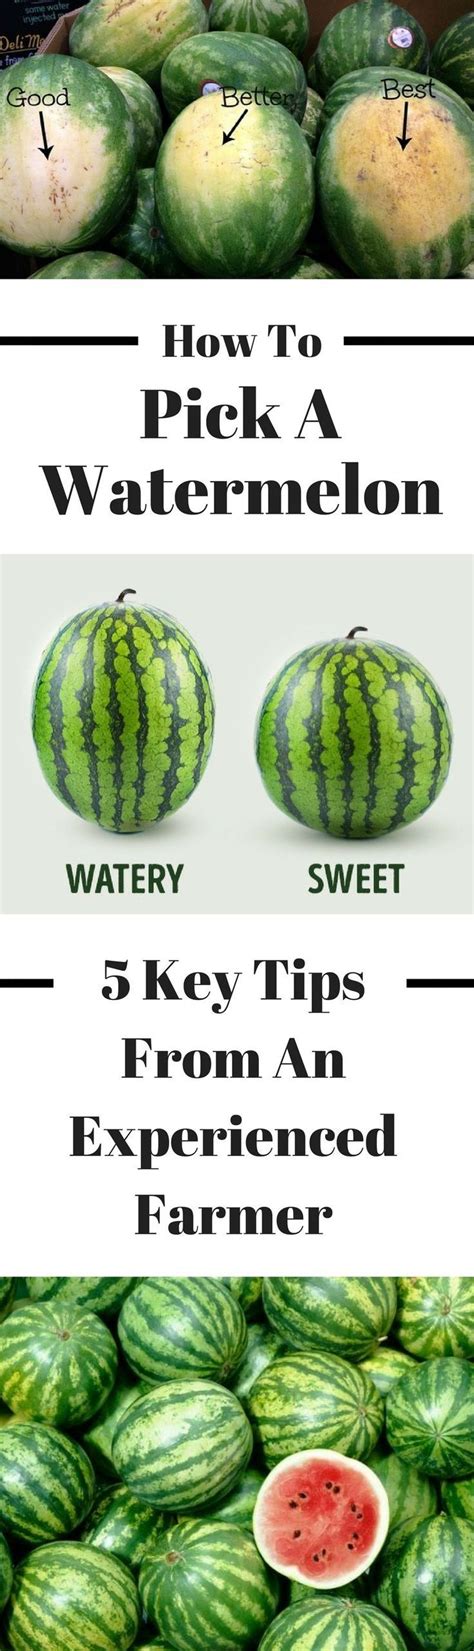 Heres How To Pick A Watermelon Follow These Great Tips From An